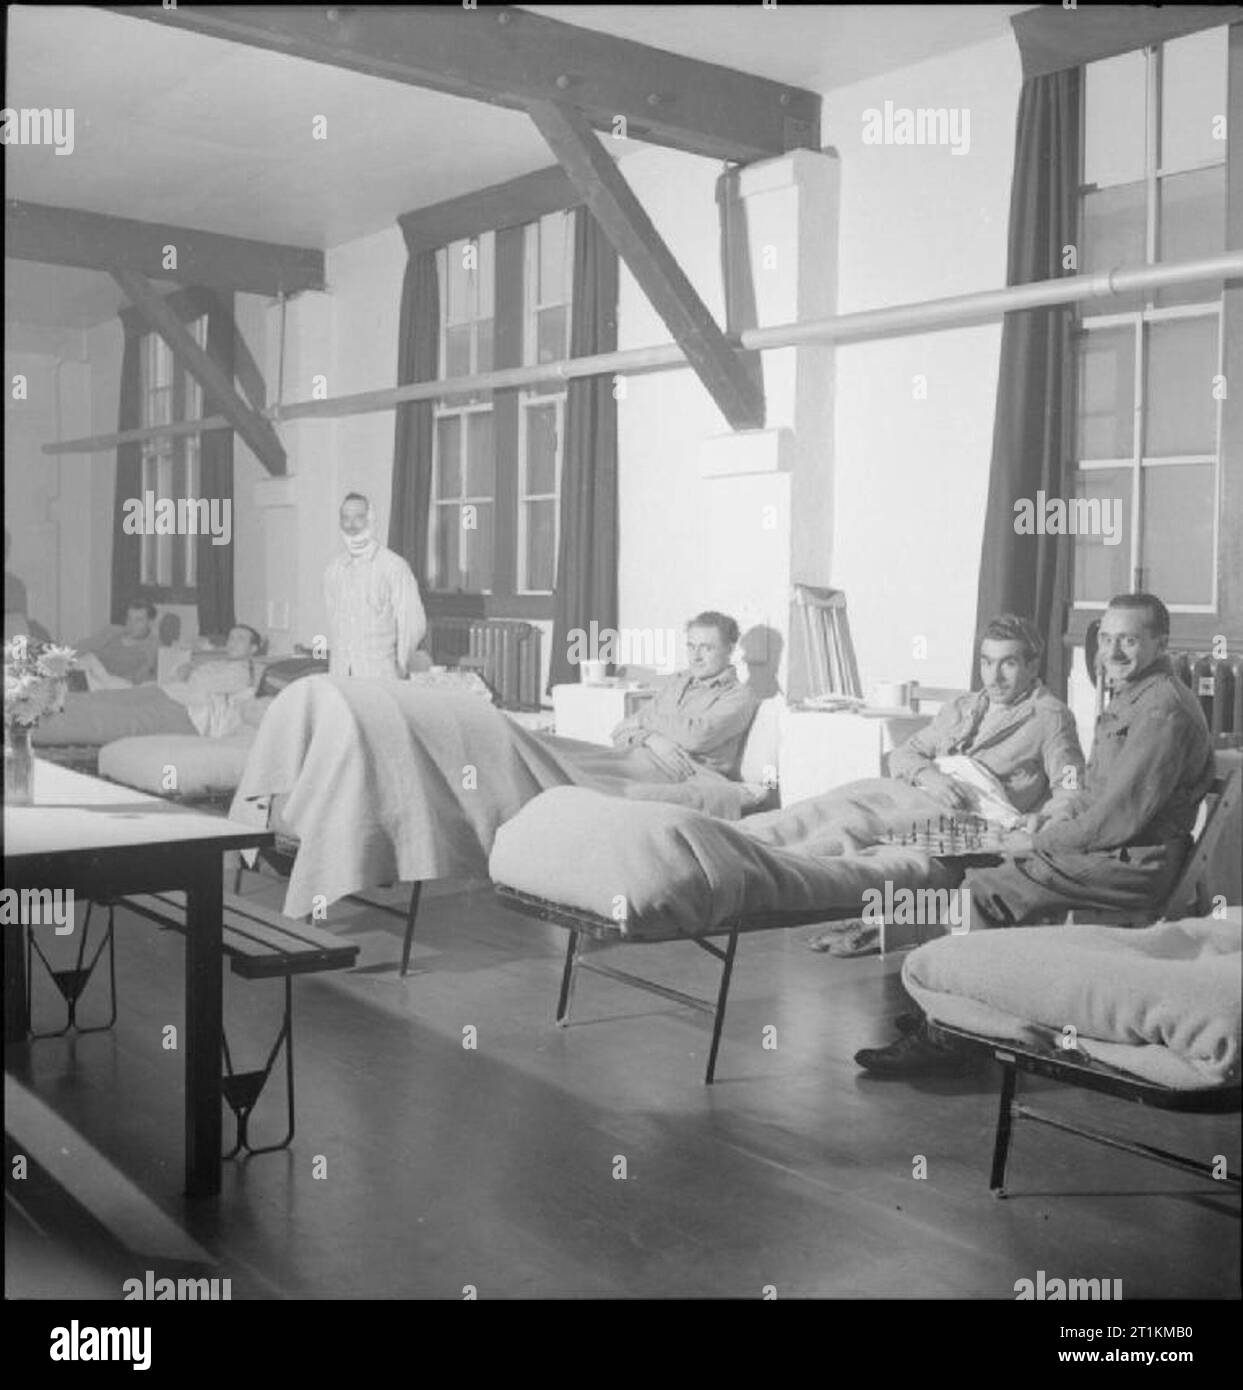 Italian Prisoners of War in Britain- Everyday Life at An Italian Pow Camp, England, UK, 1945 A general view of the infirmary at the N.144 workers camp near London, showing Italian PoWs in their hospital beds. Stock Photo